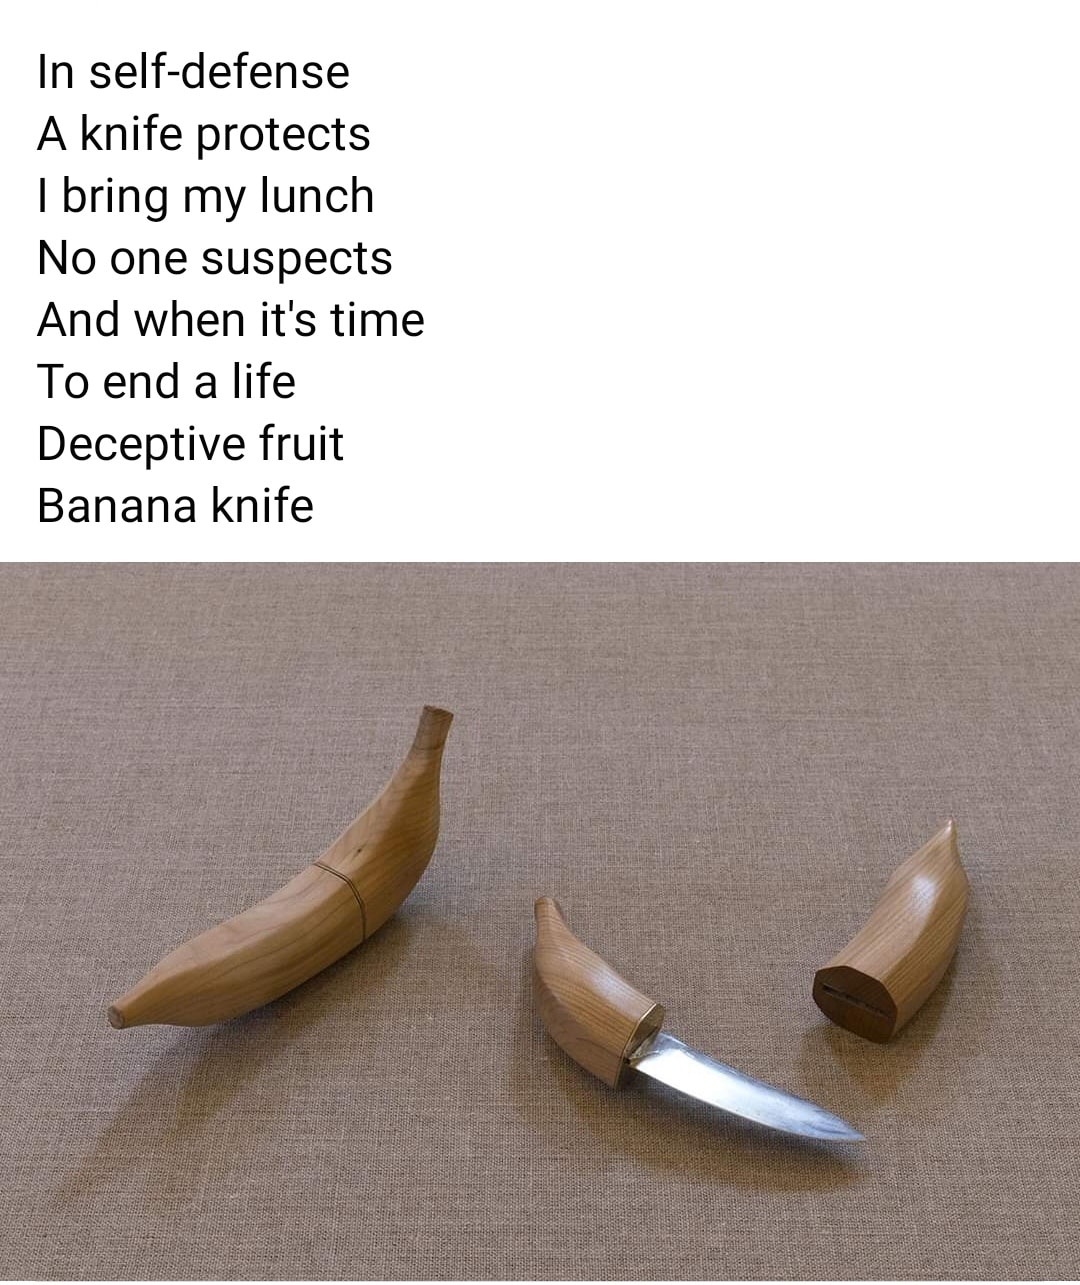 knife that looks like a banana - In selfdefense A knife protects I bring my lunch No one suspects And when it's time To end a life Deceptive fruit Banana knife